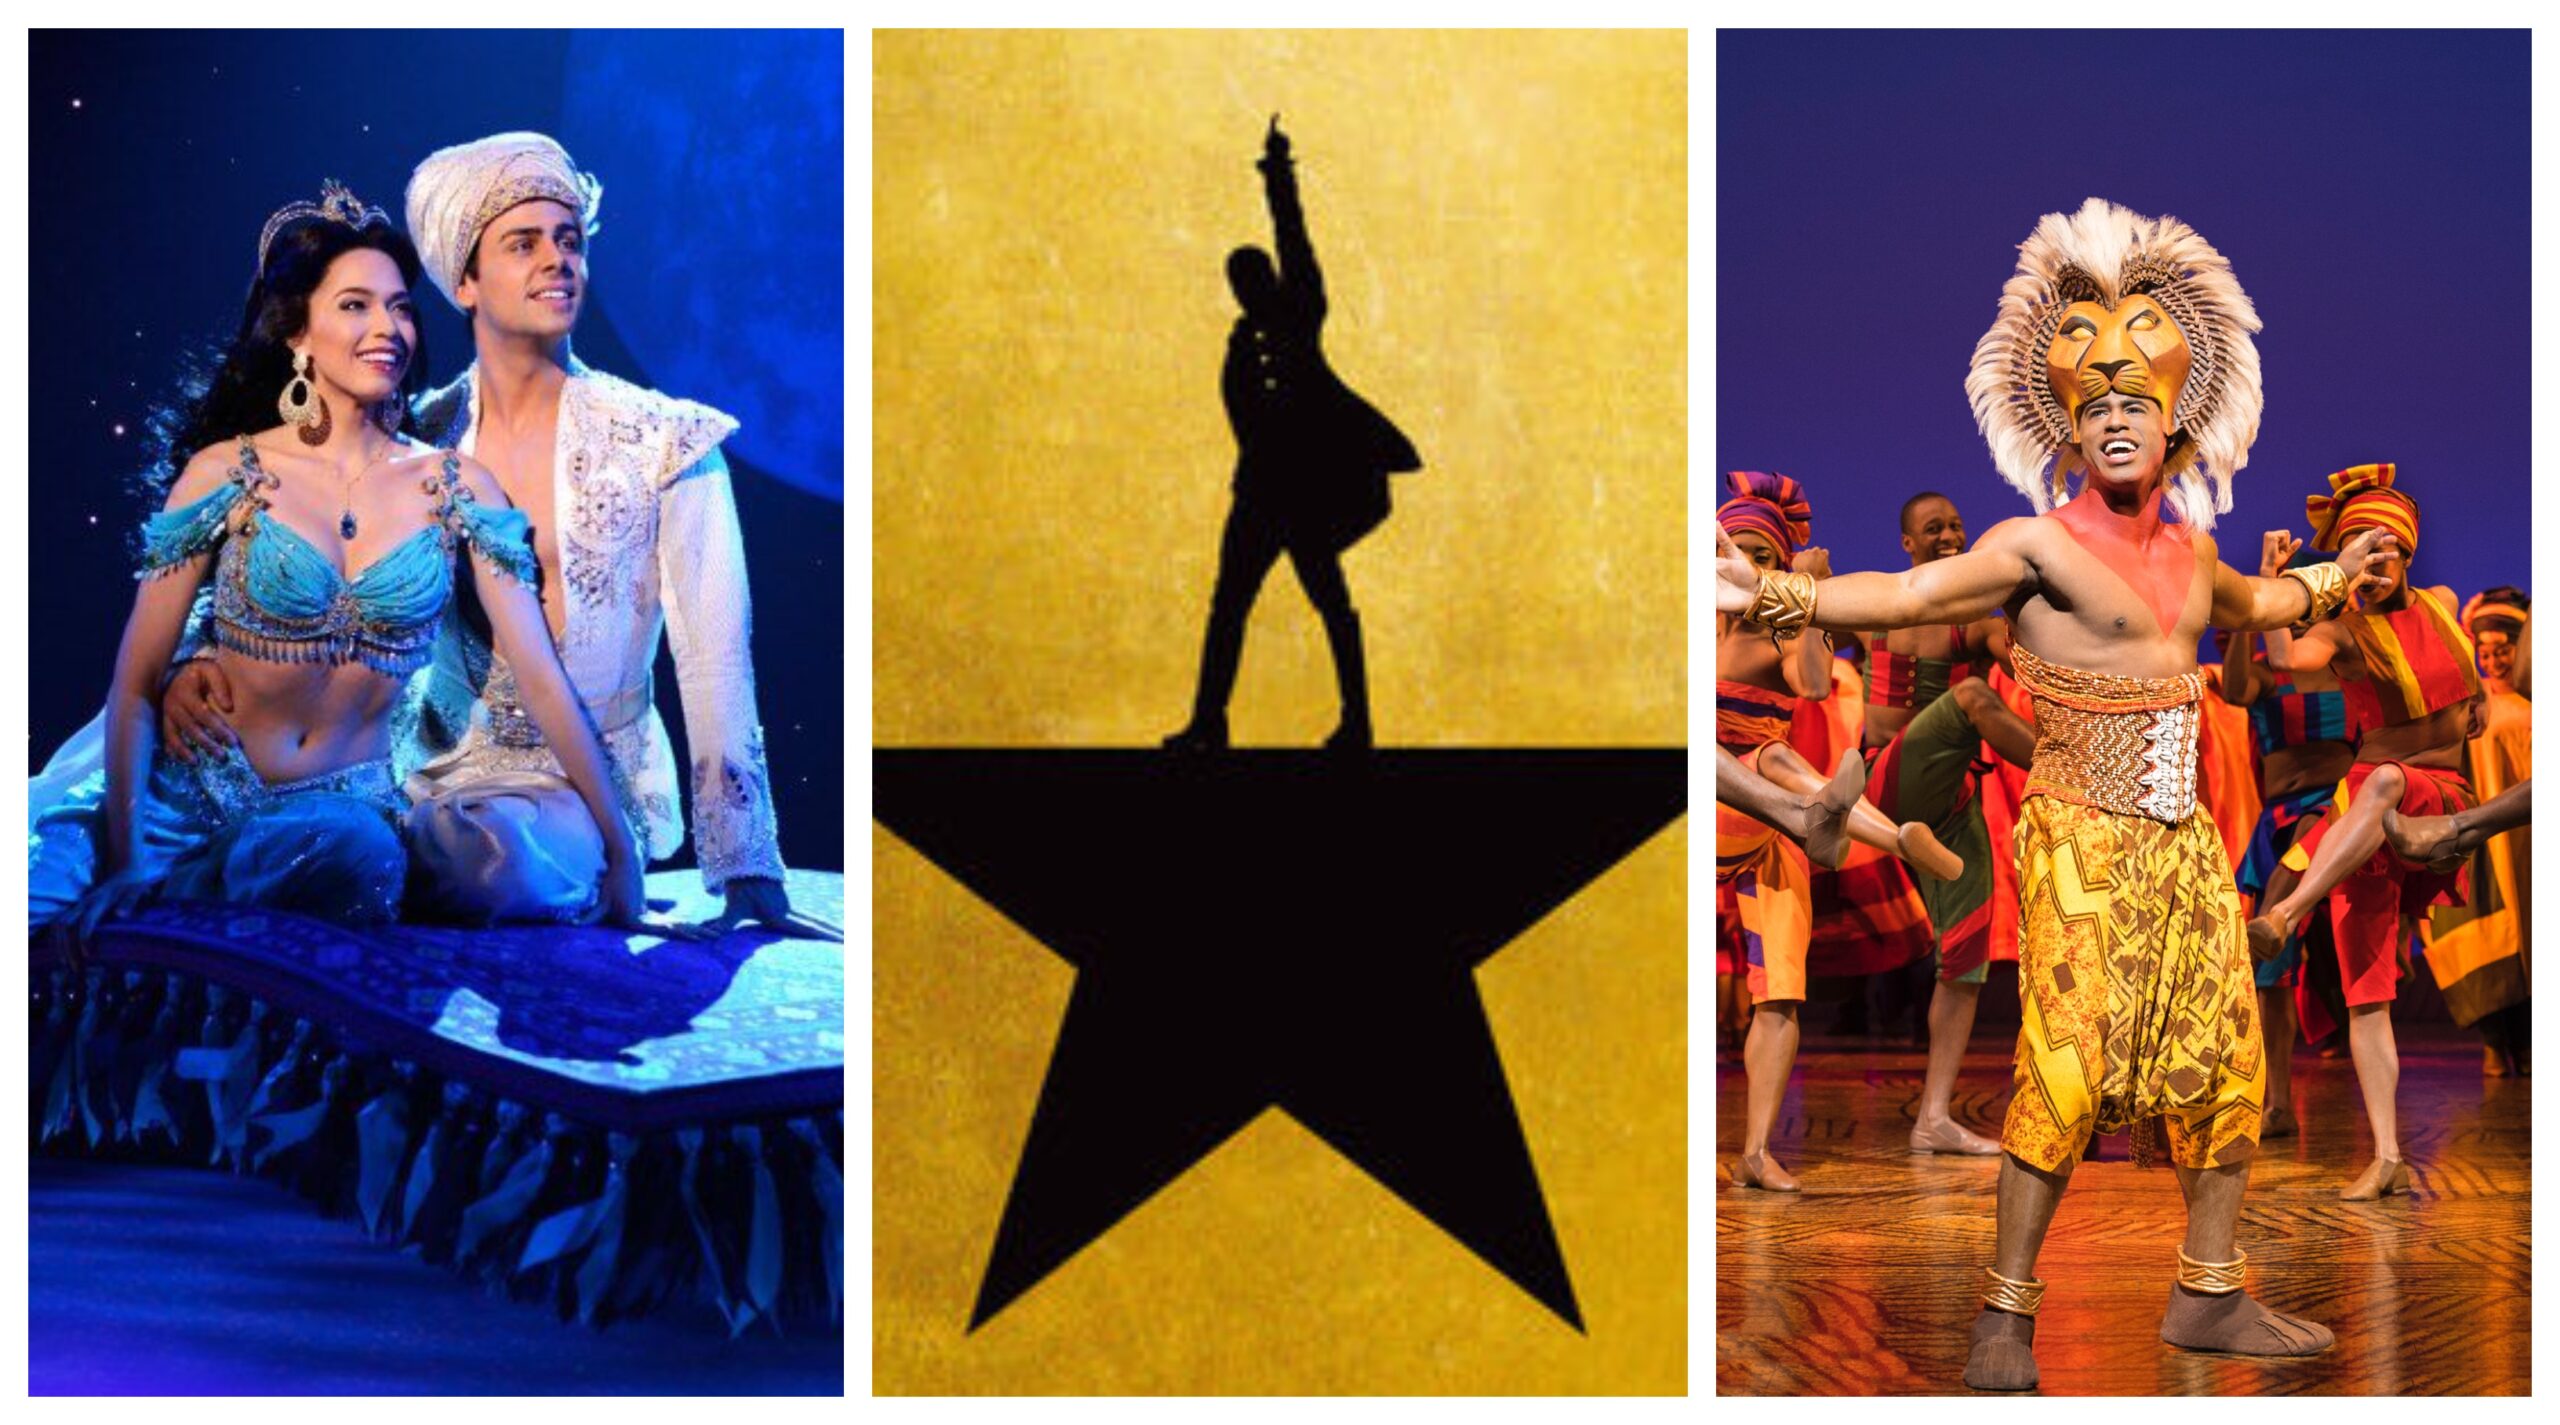 Aladdin on Broadway (left) Hamilton Poster (center) The Lion King on Broadway (right)